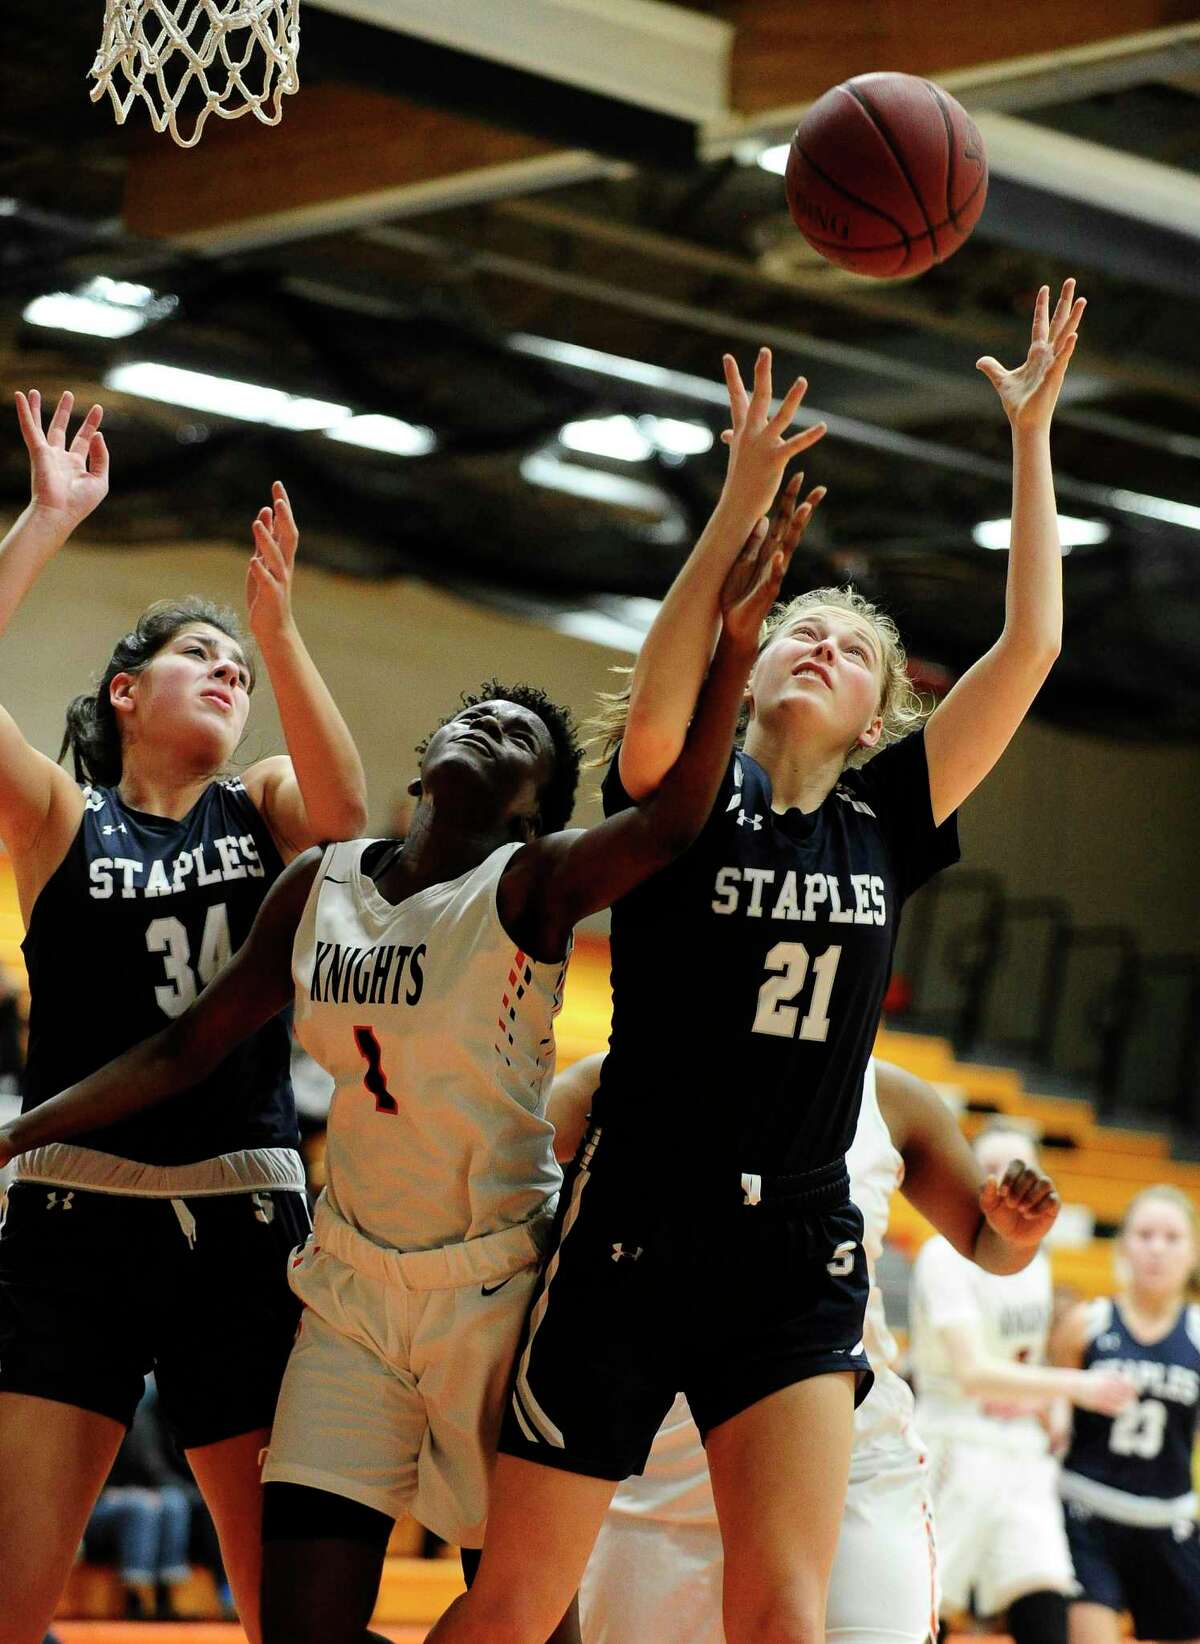 Stamford’s Breanna Jacobs fights for a rebound with Staples’ Ariana Gerig (34) and Marisa Shurrock (21) in the first half of Thursday’s game at Kuzco Gymnasium in Stamford.